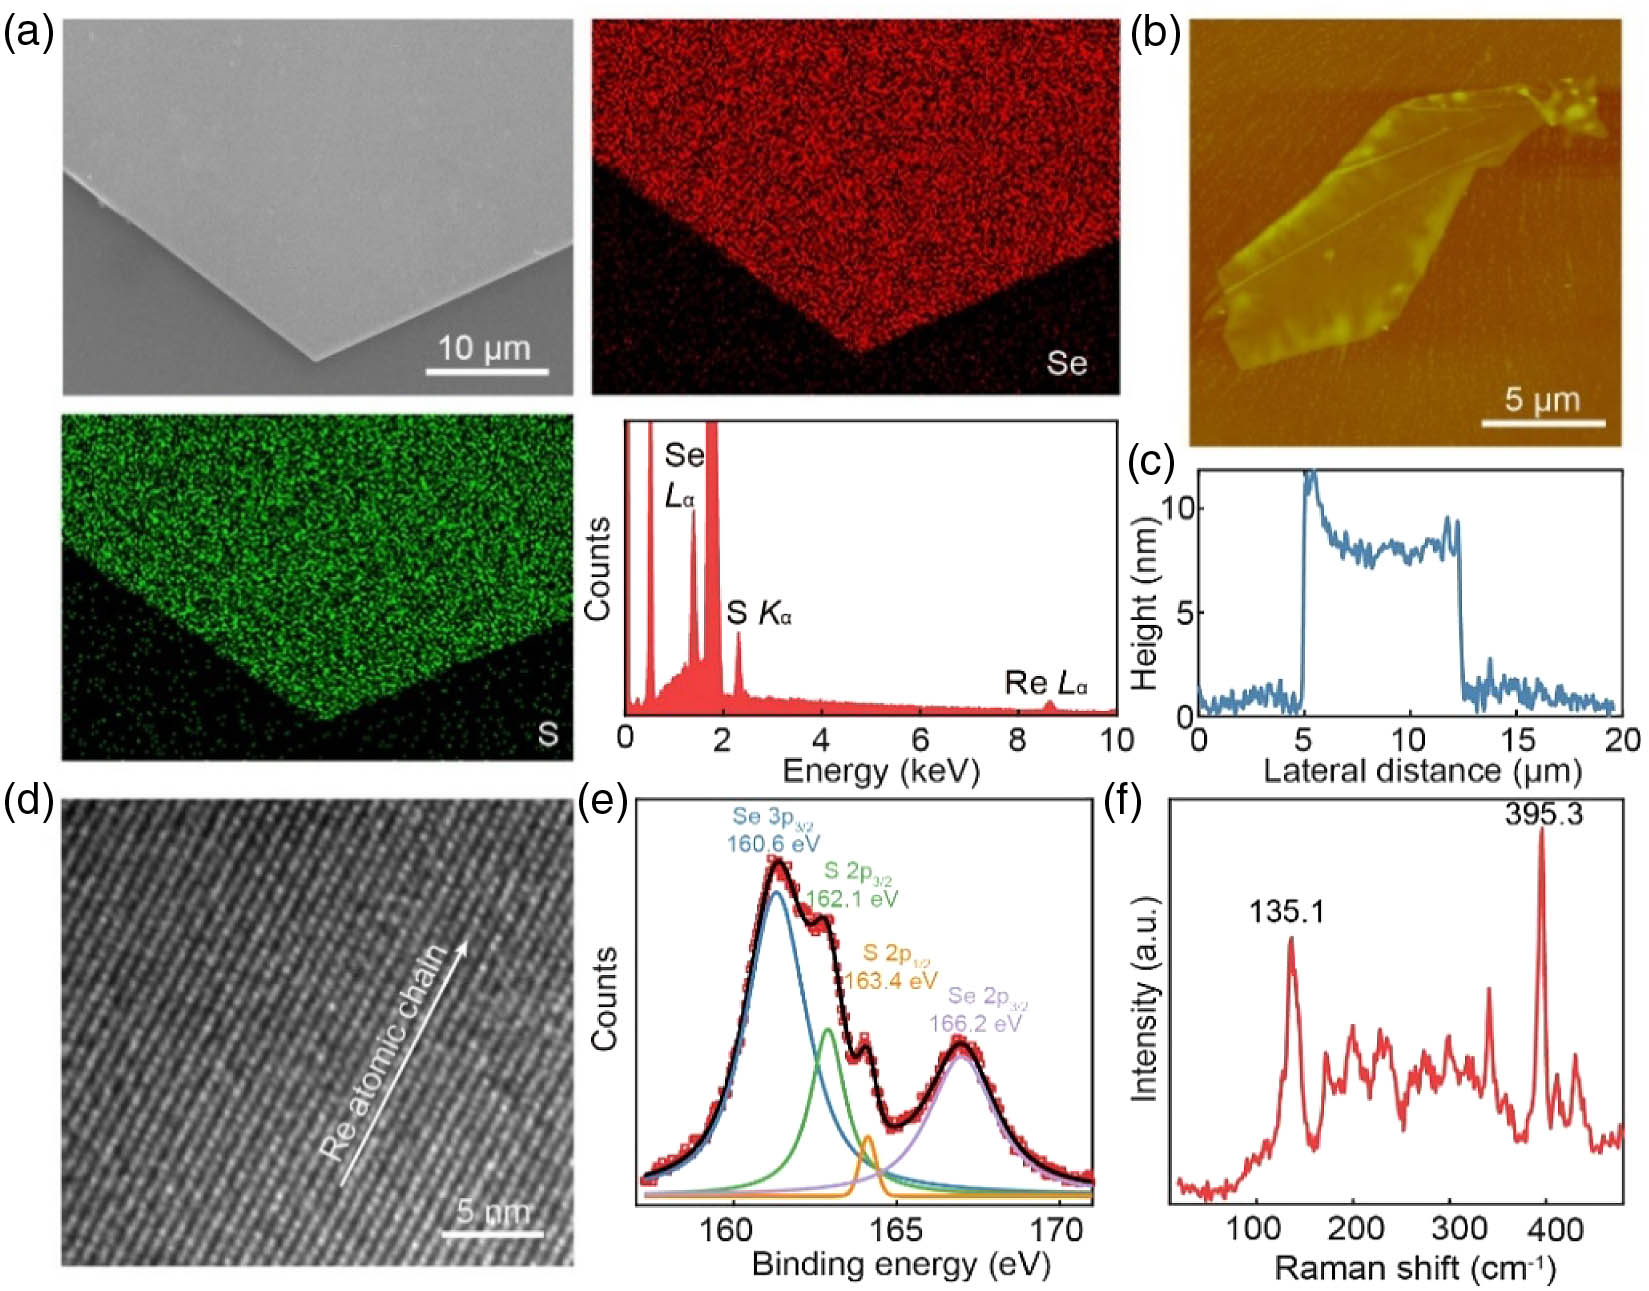 (a) SEM image, EDS elemental mapping and spectrum of Re, S, and Se. (b) AFM topography, (c) height diagram of a ReS1.02Se0.98 flake on a SiO2/Si substrate. (d) HRTEM image, (e) XPS profiles, and (f) Raman spectra of a ReS1.02Se0.98 flake.